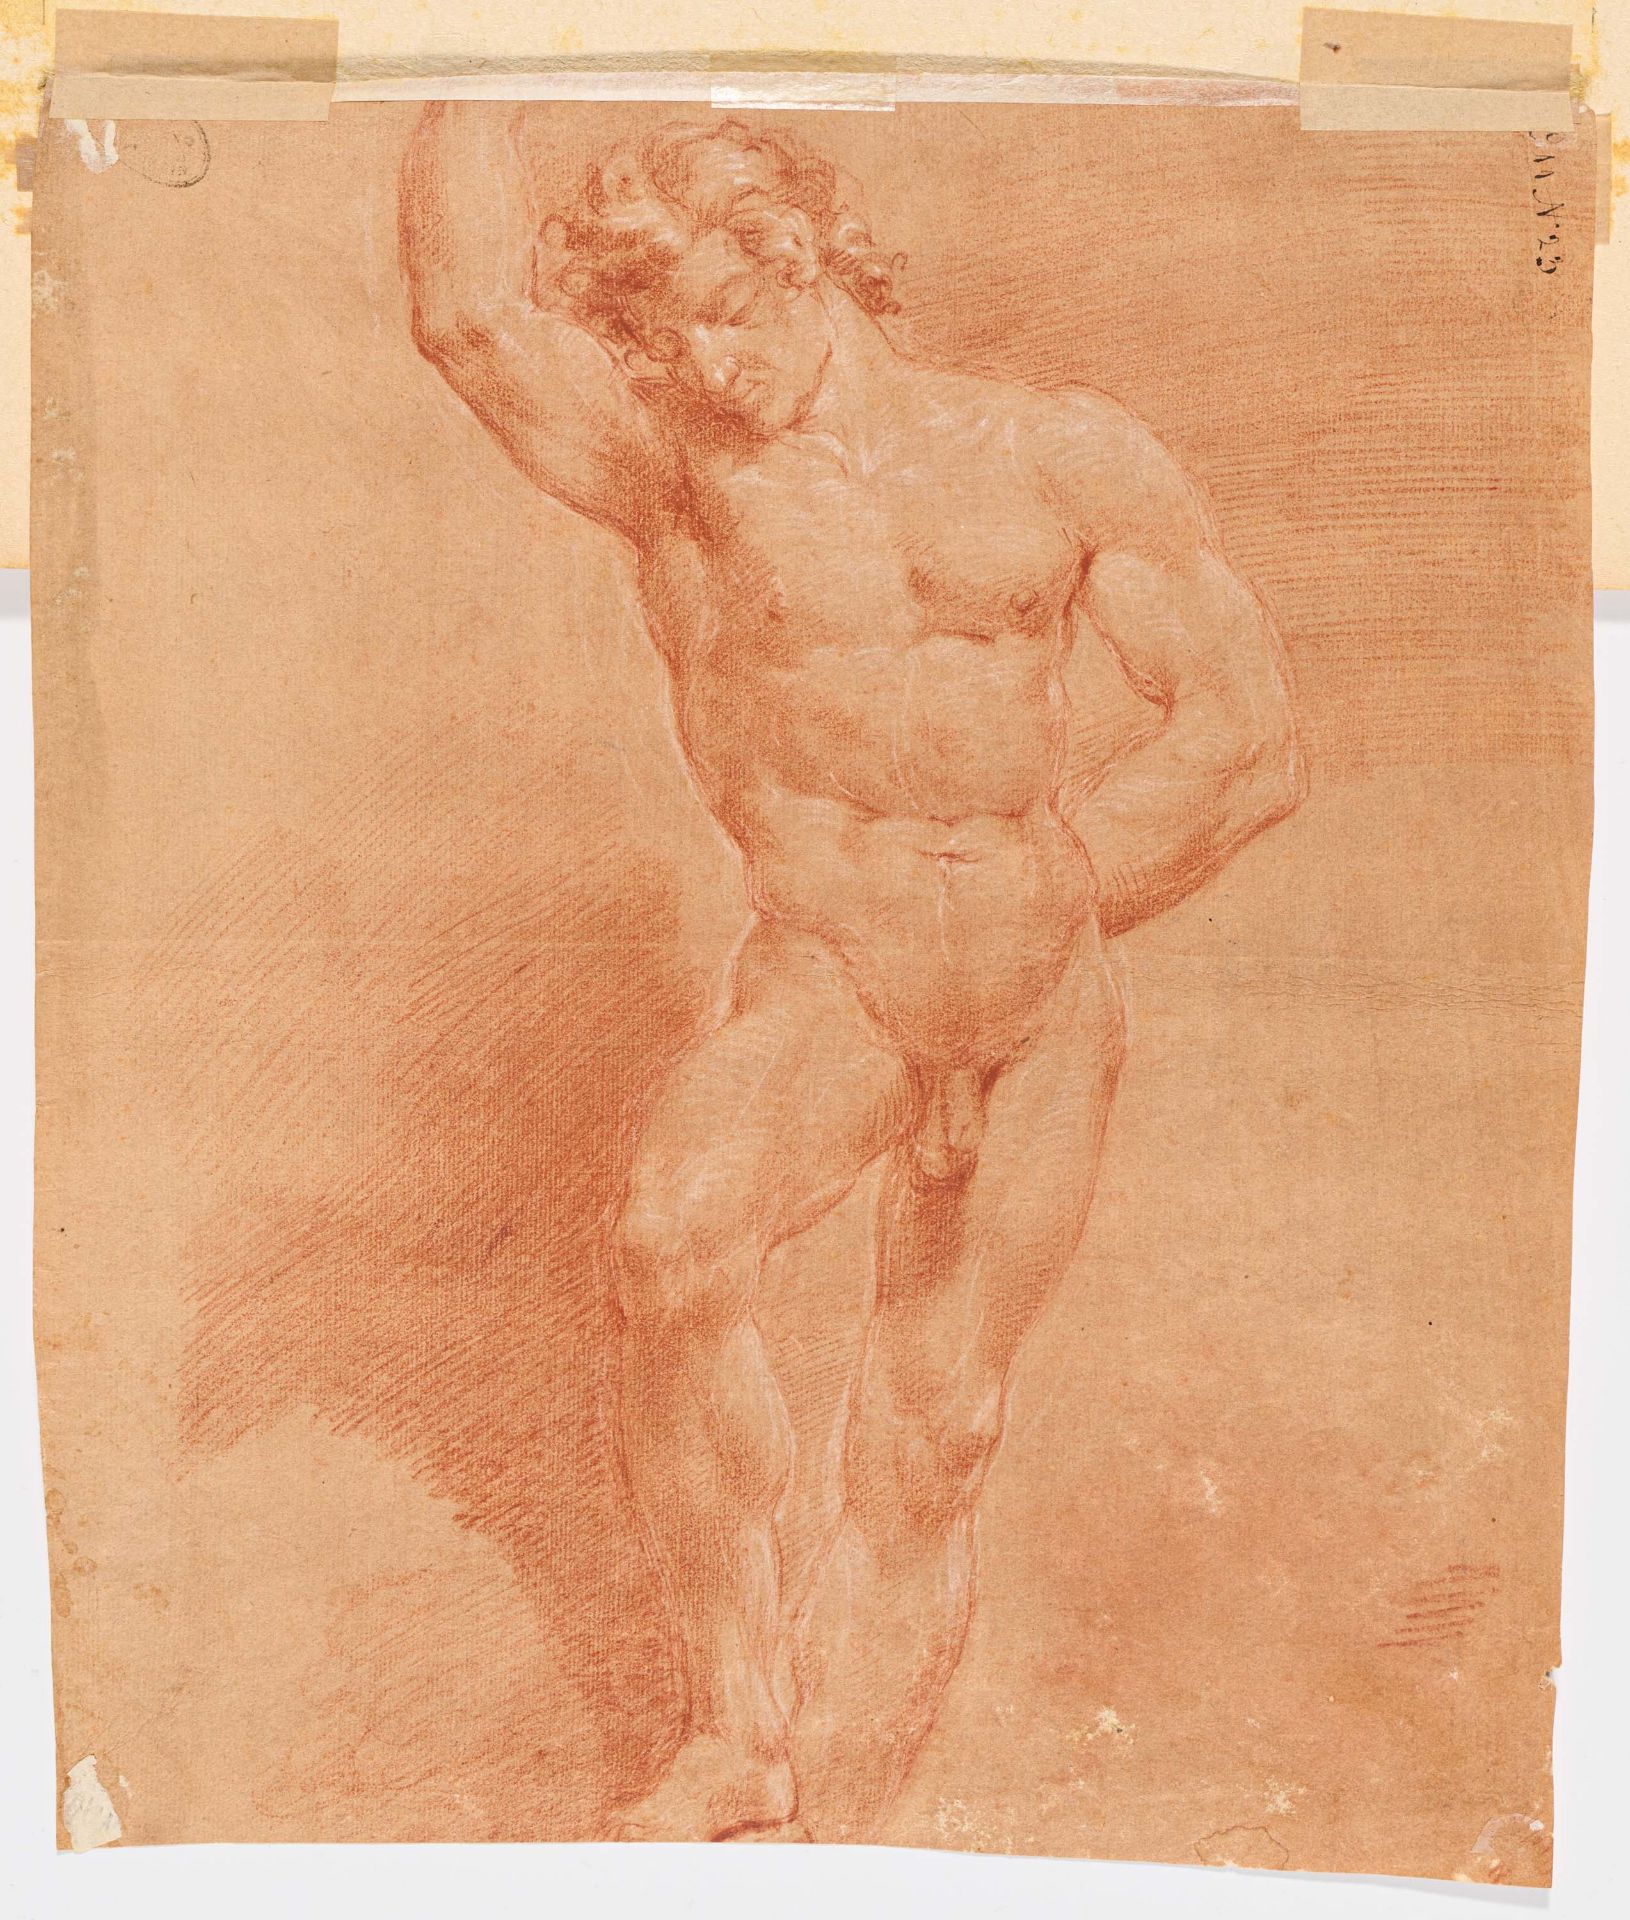 Bolognese School: Male Nude (Preliminary Study for Christ's Deposition?) - Image 2 of 2